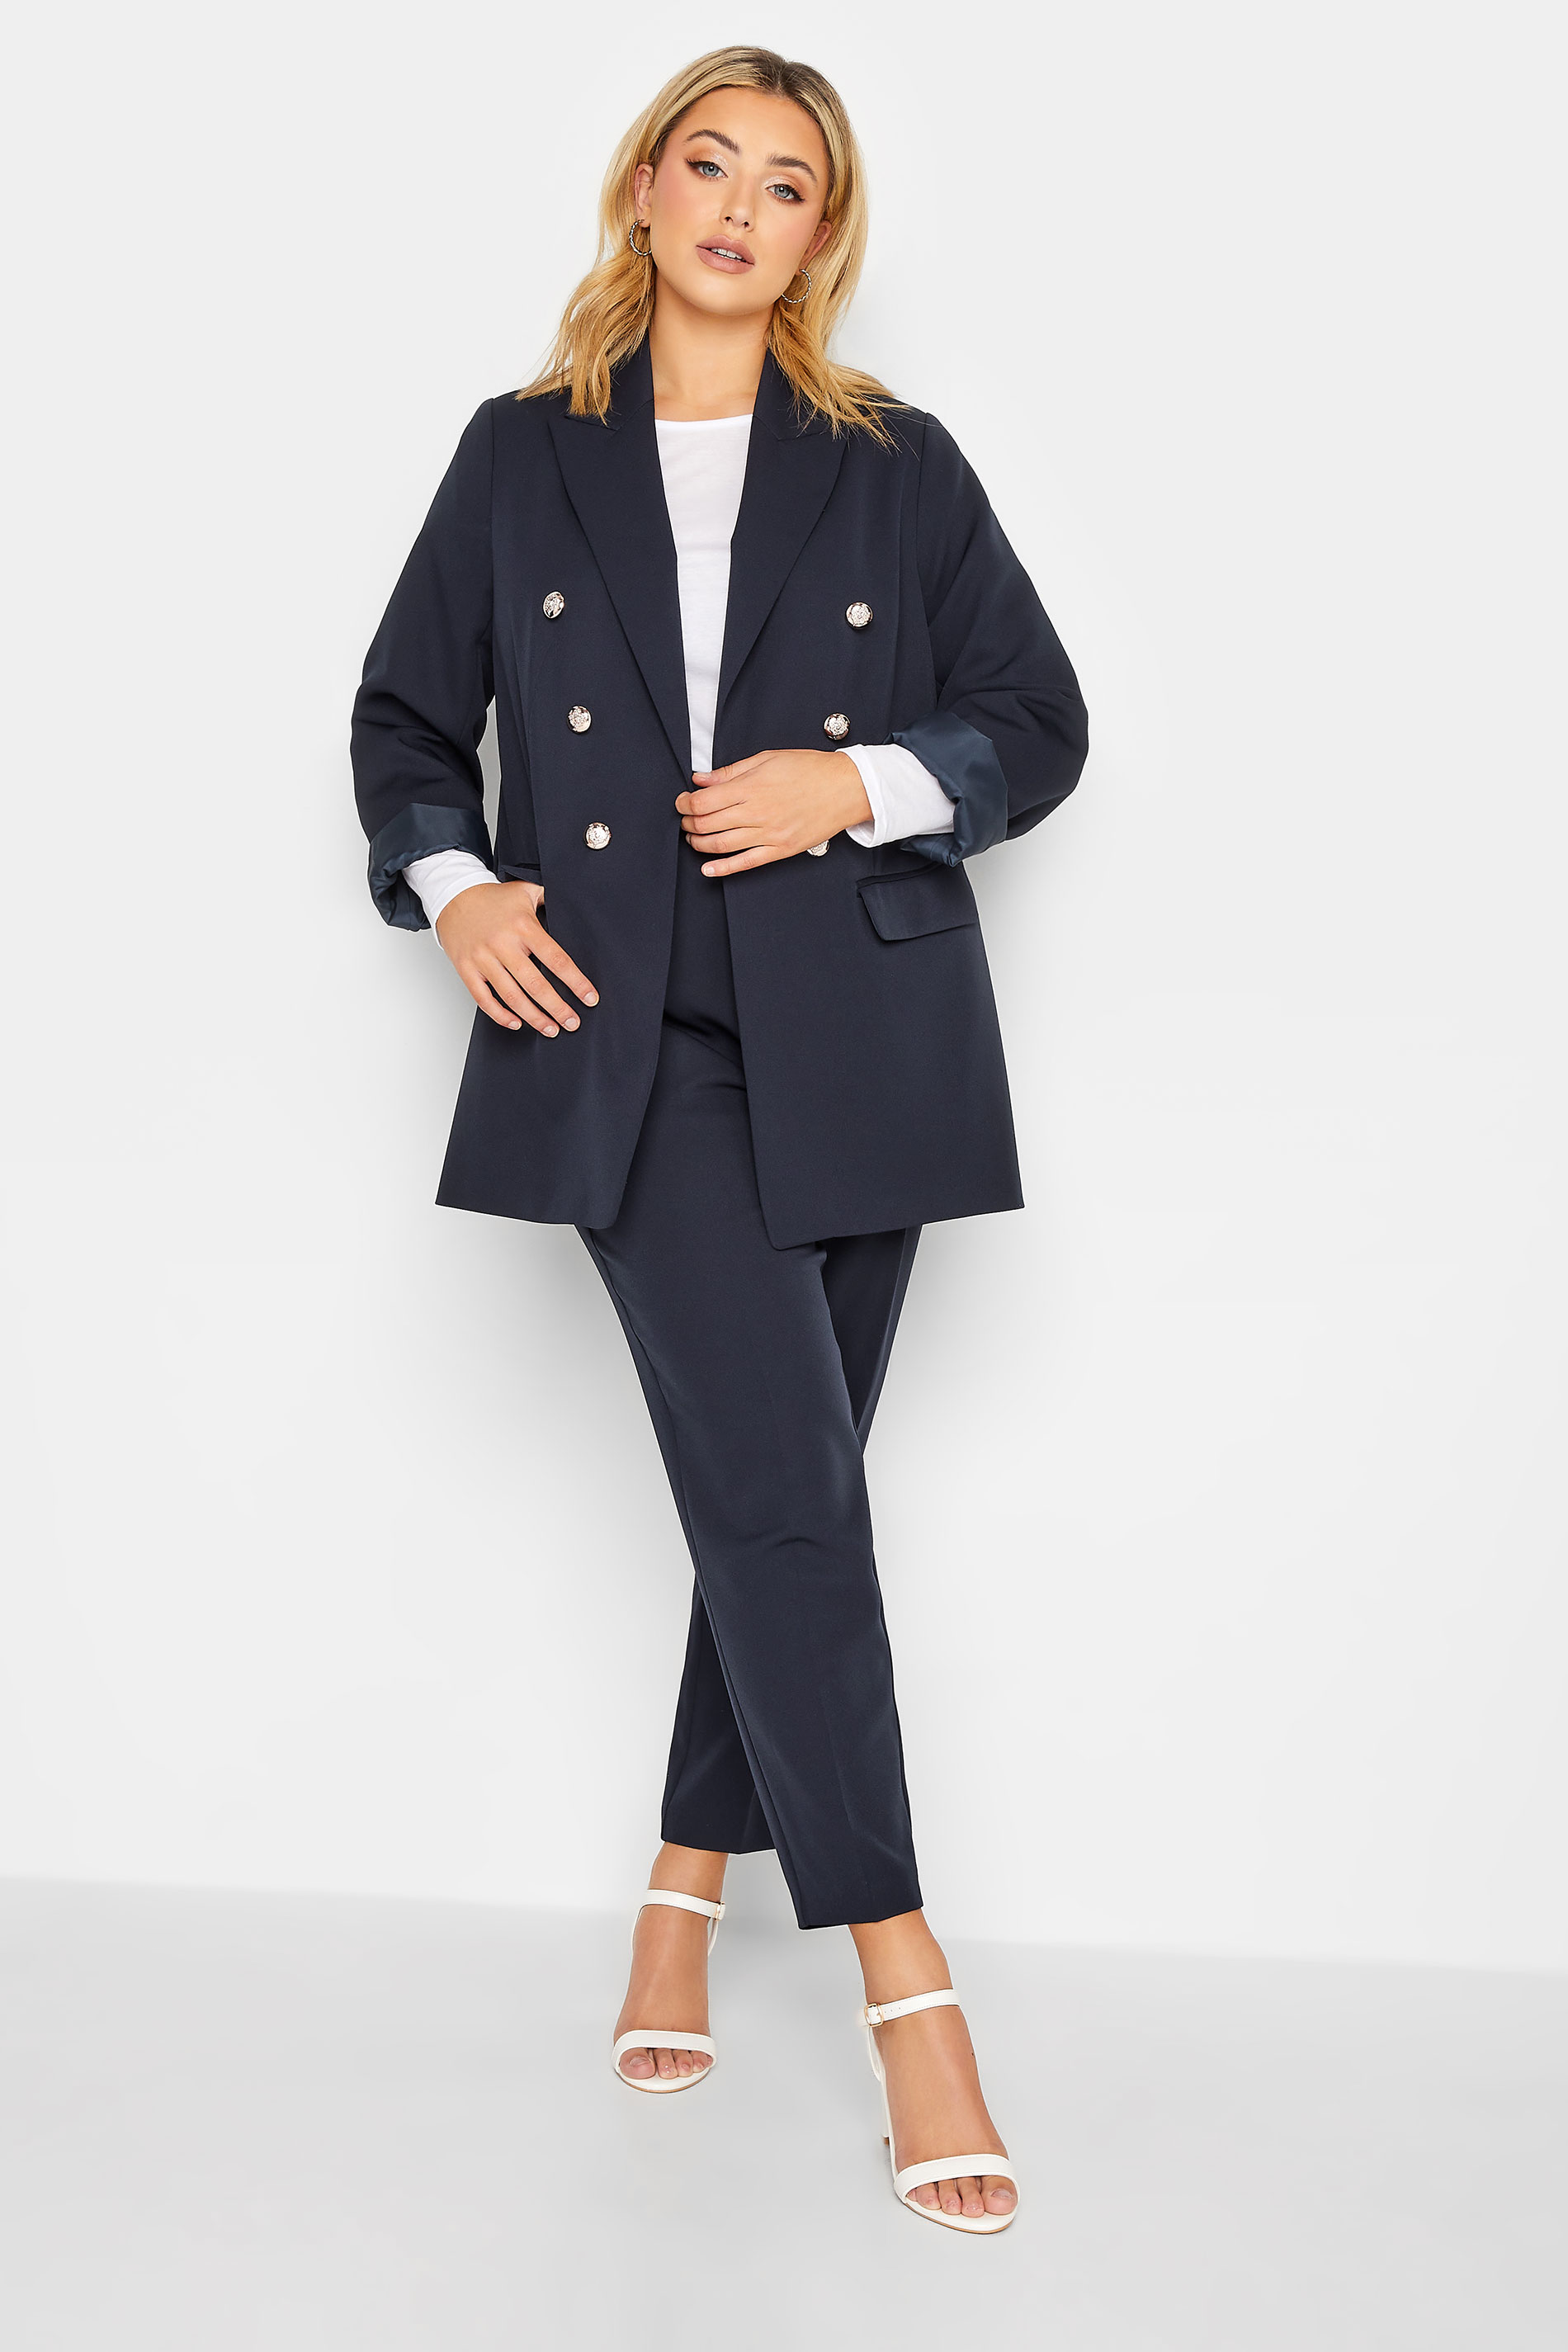 YOURS Plus Size Navy Blue Military Blazer | Yours Clothing 2